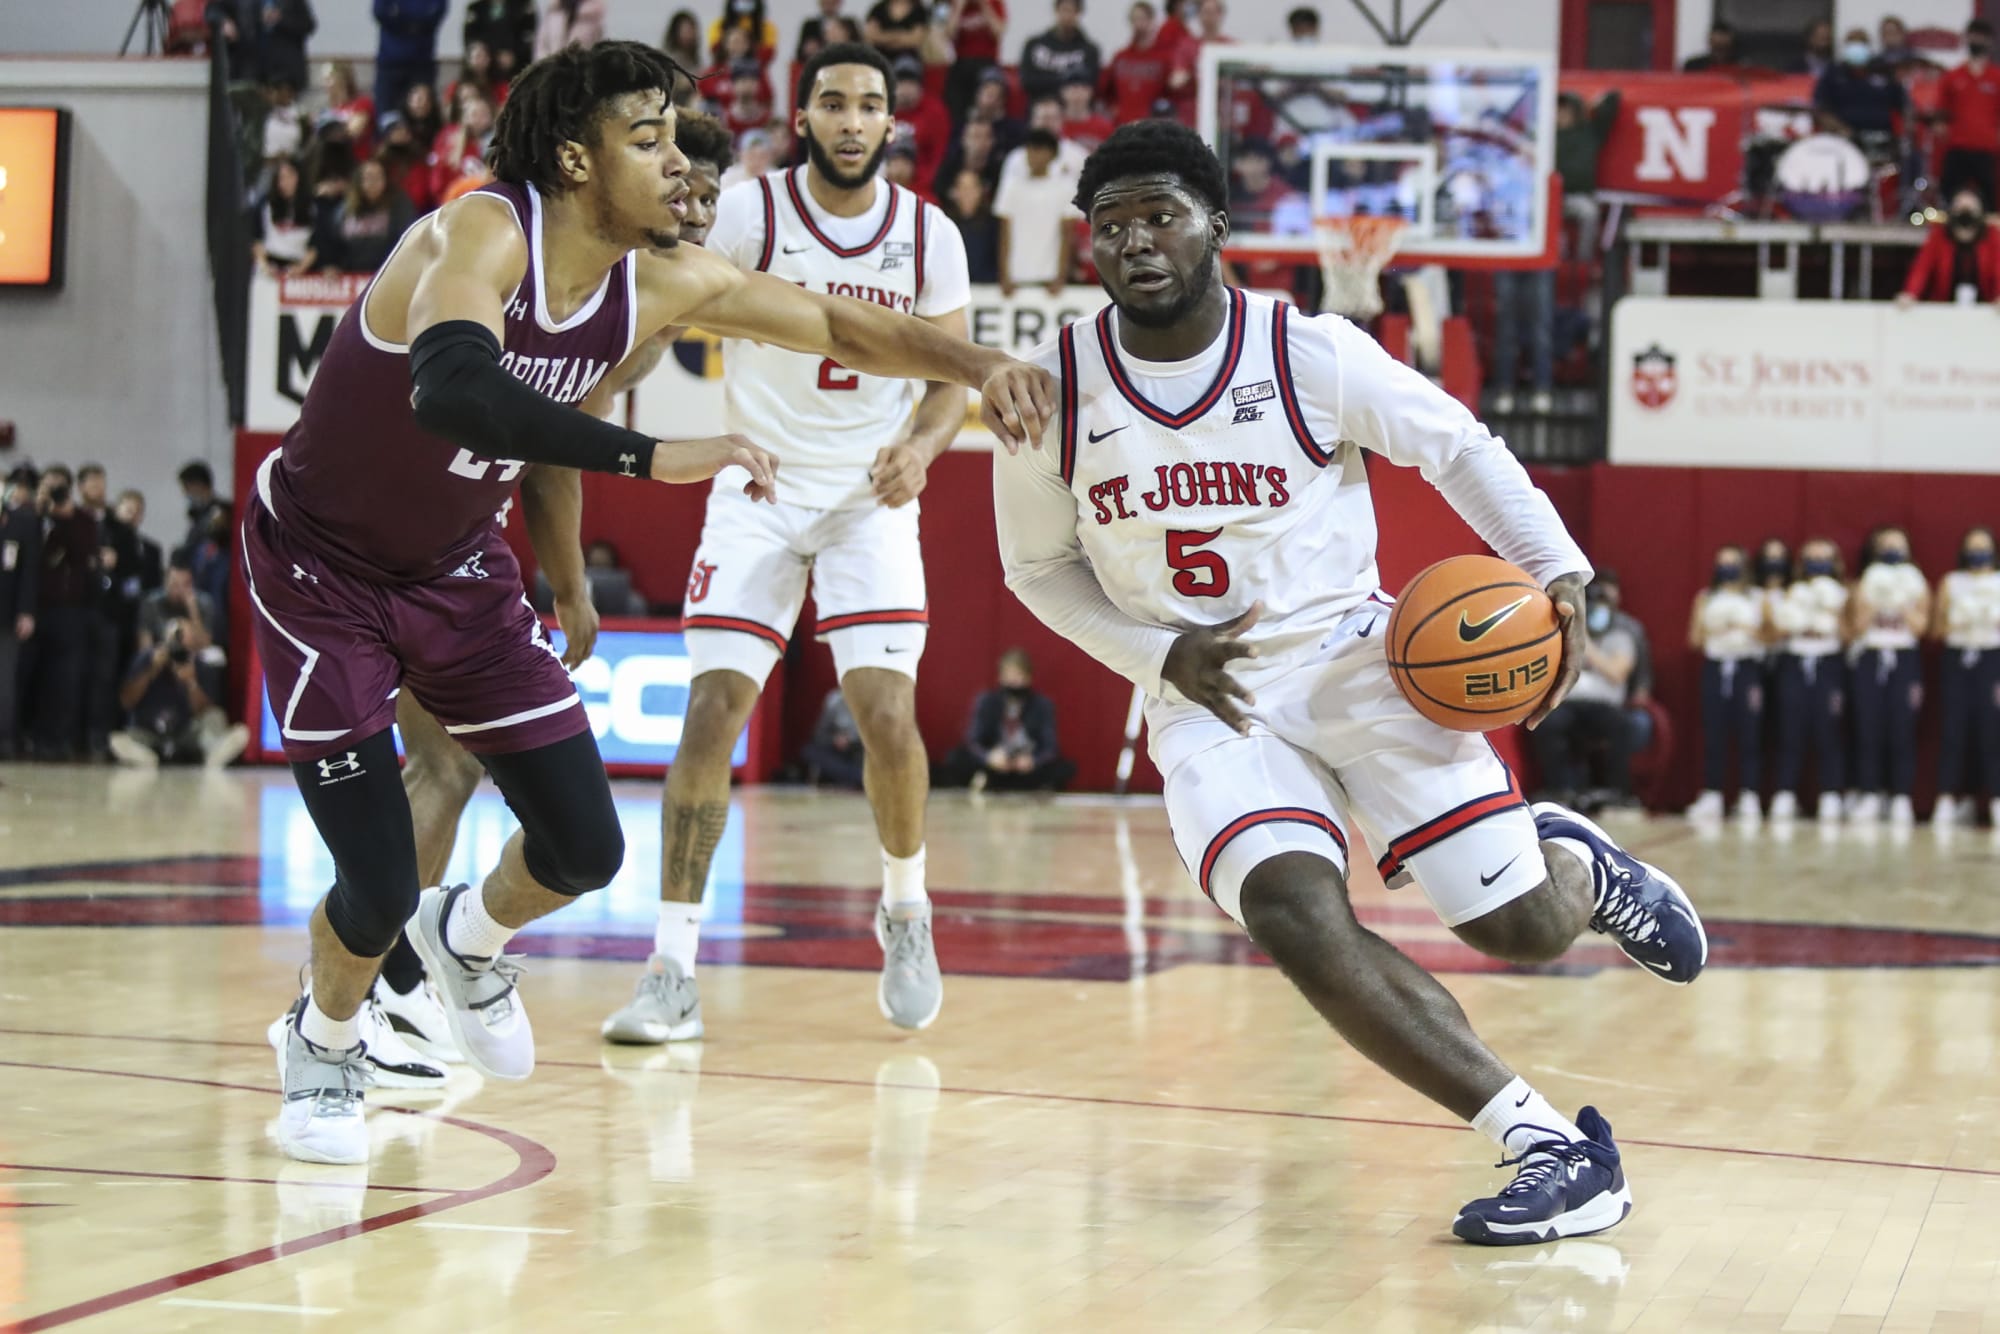 St. John's basketball uses new starting lineup in victory over Fordham